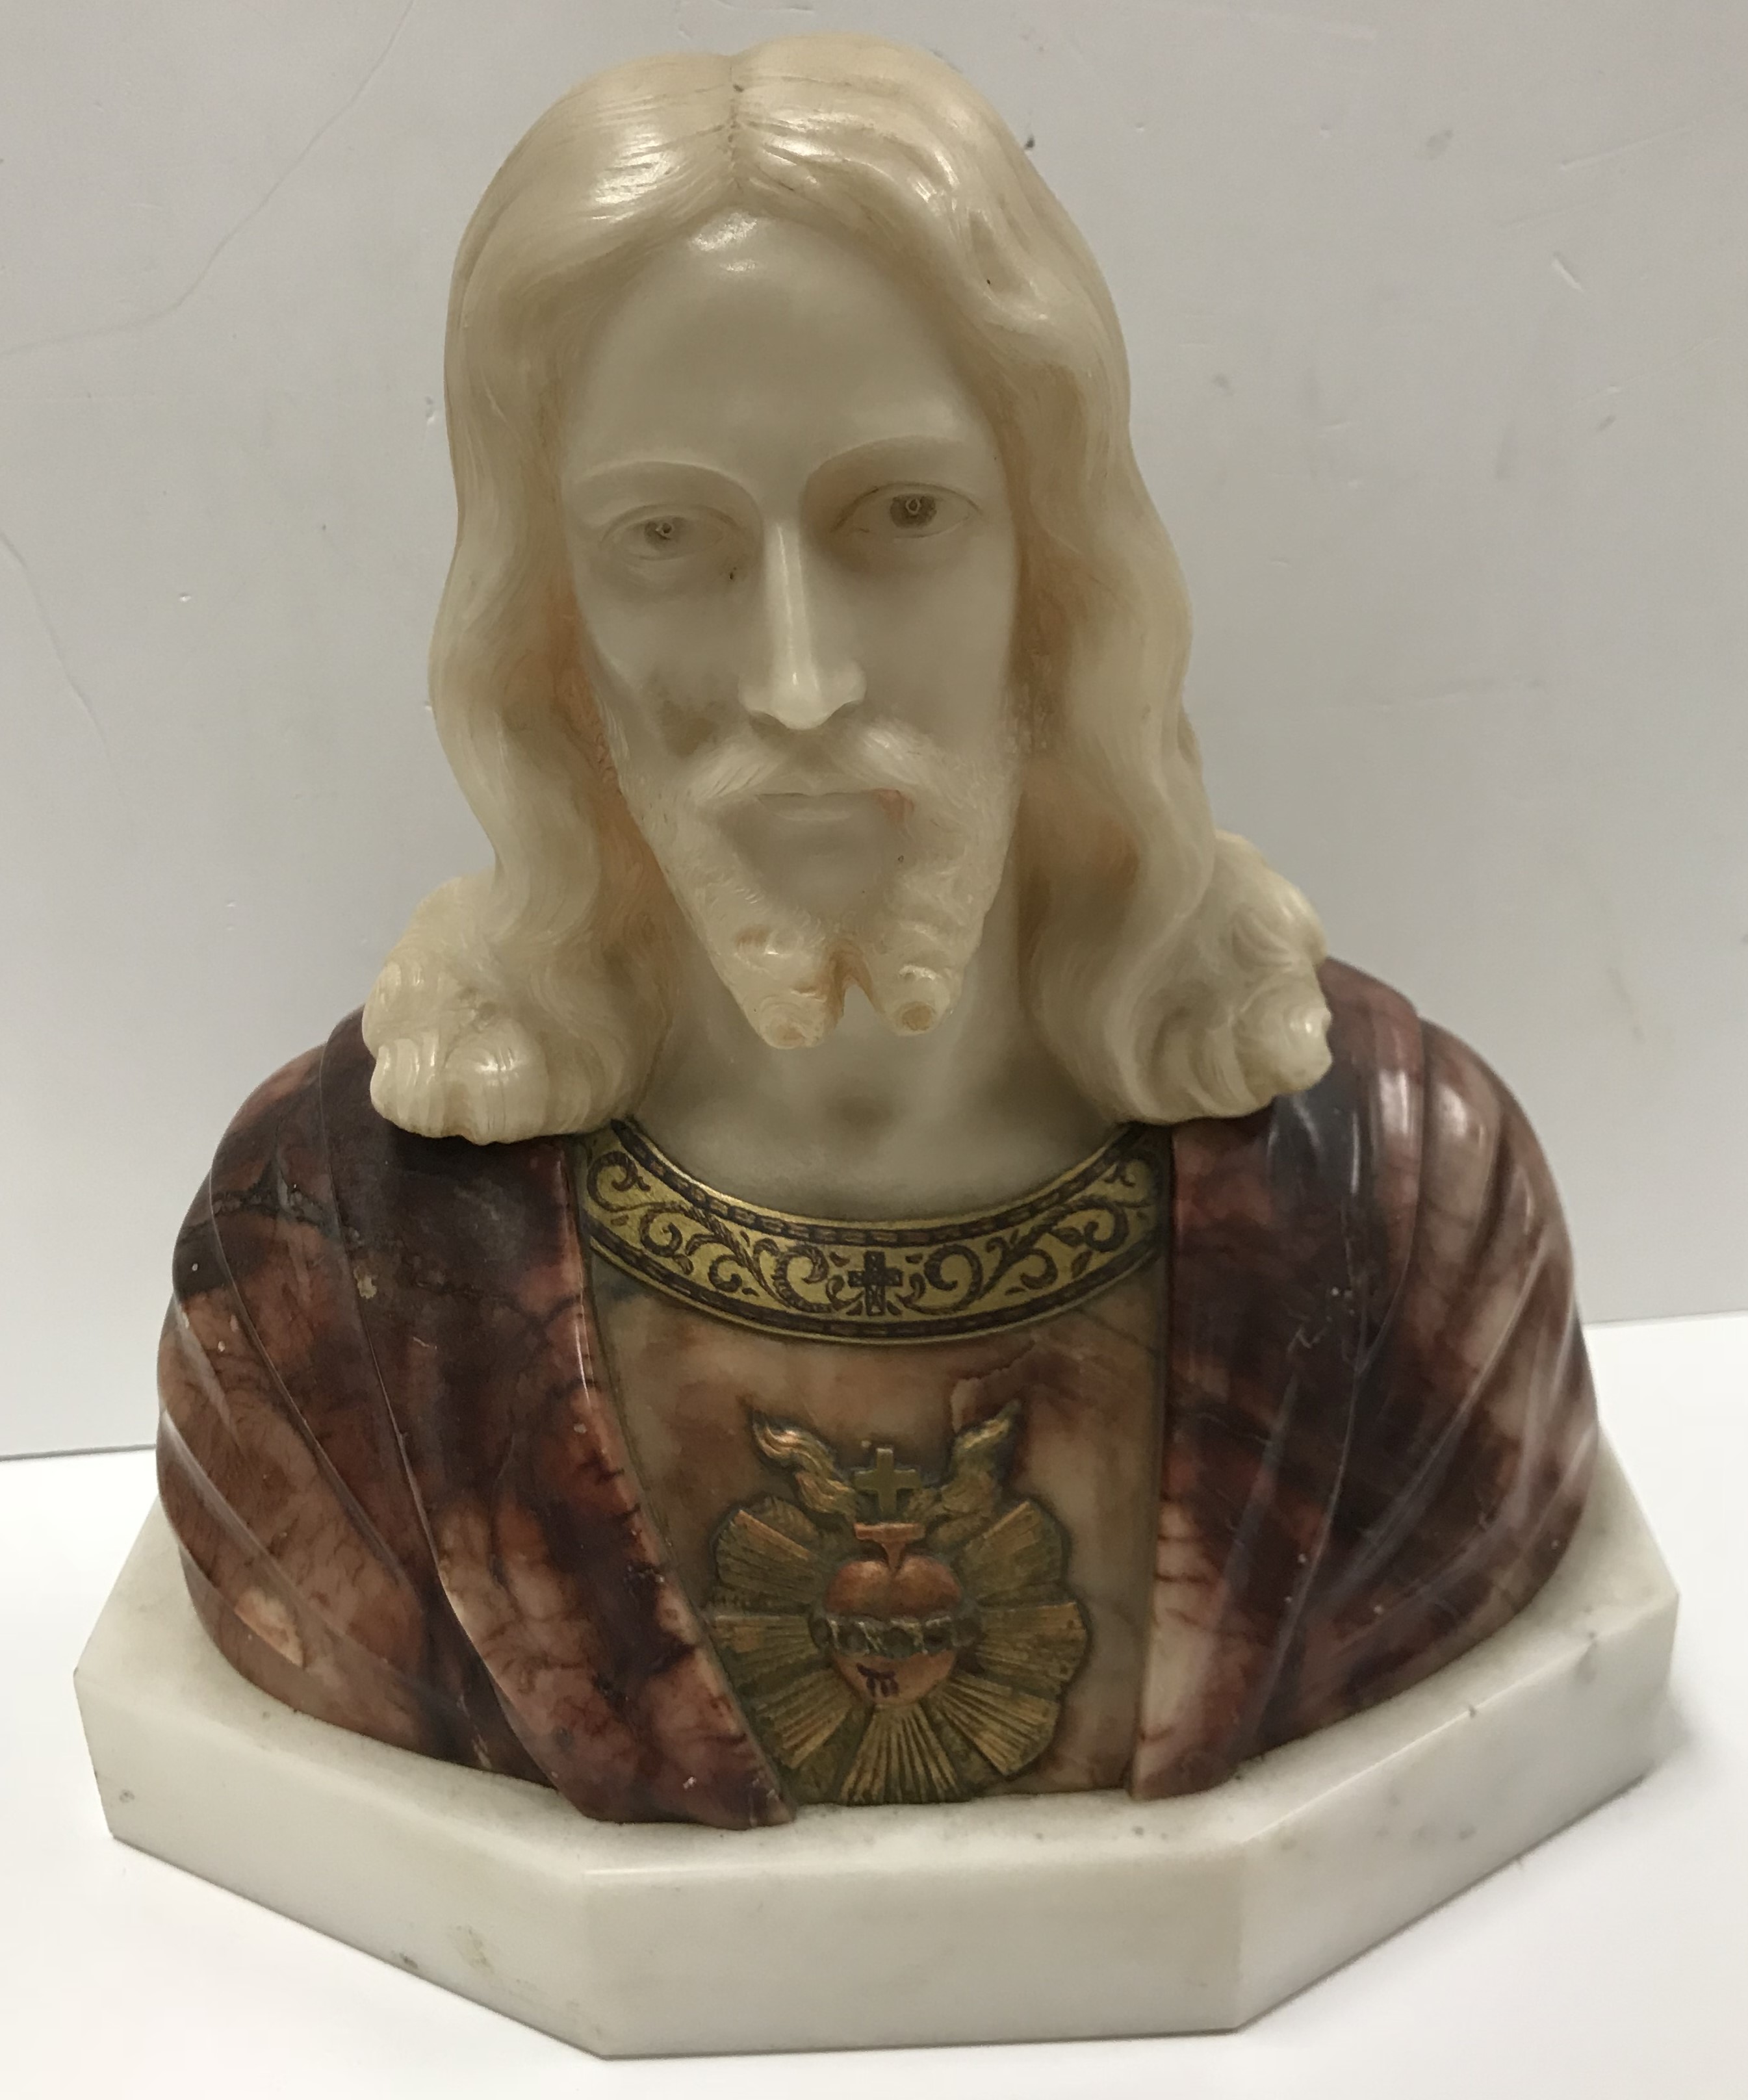 An alabaster carved figural bust of Christ with sacred heart motif at his breast,